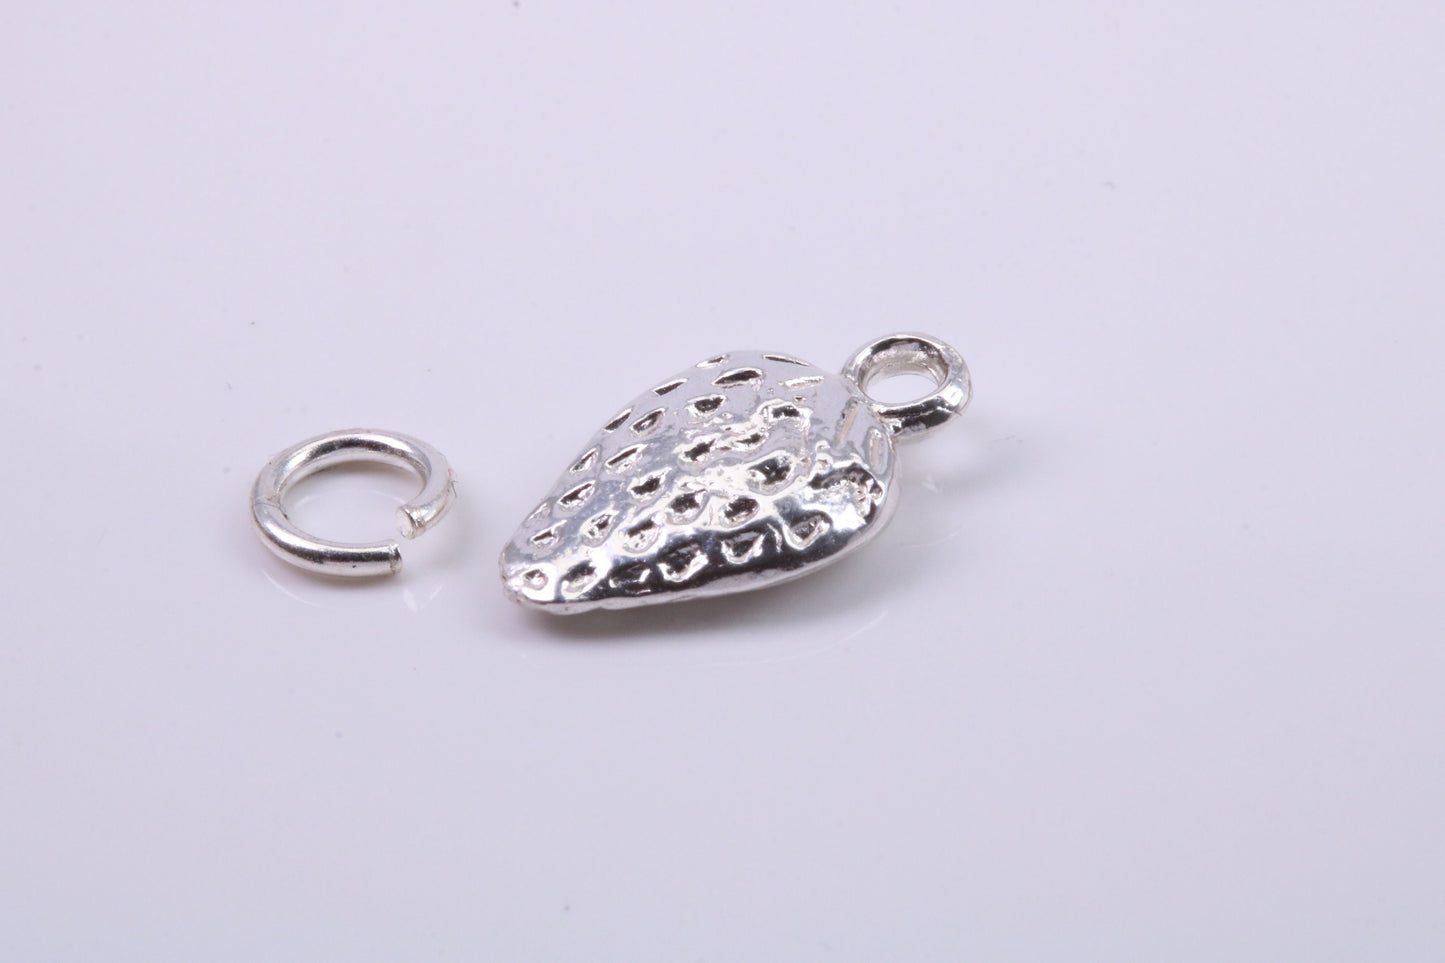 Strawberry Charm, Traditional Charm, Made from Solid 925 Grade Sterling Silver, Complete with Attachment Link